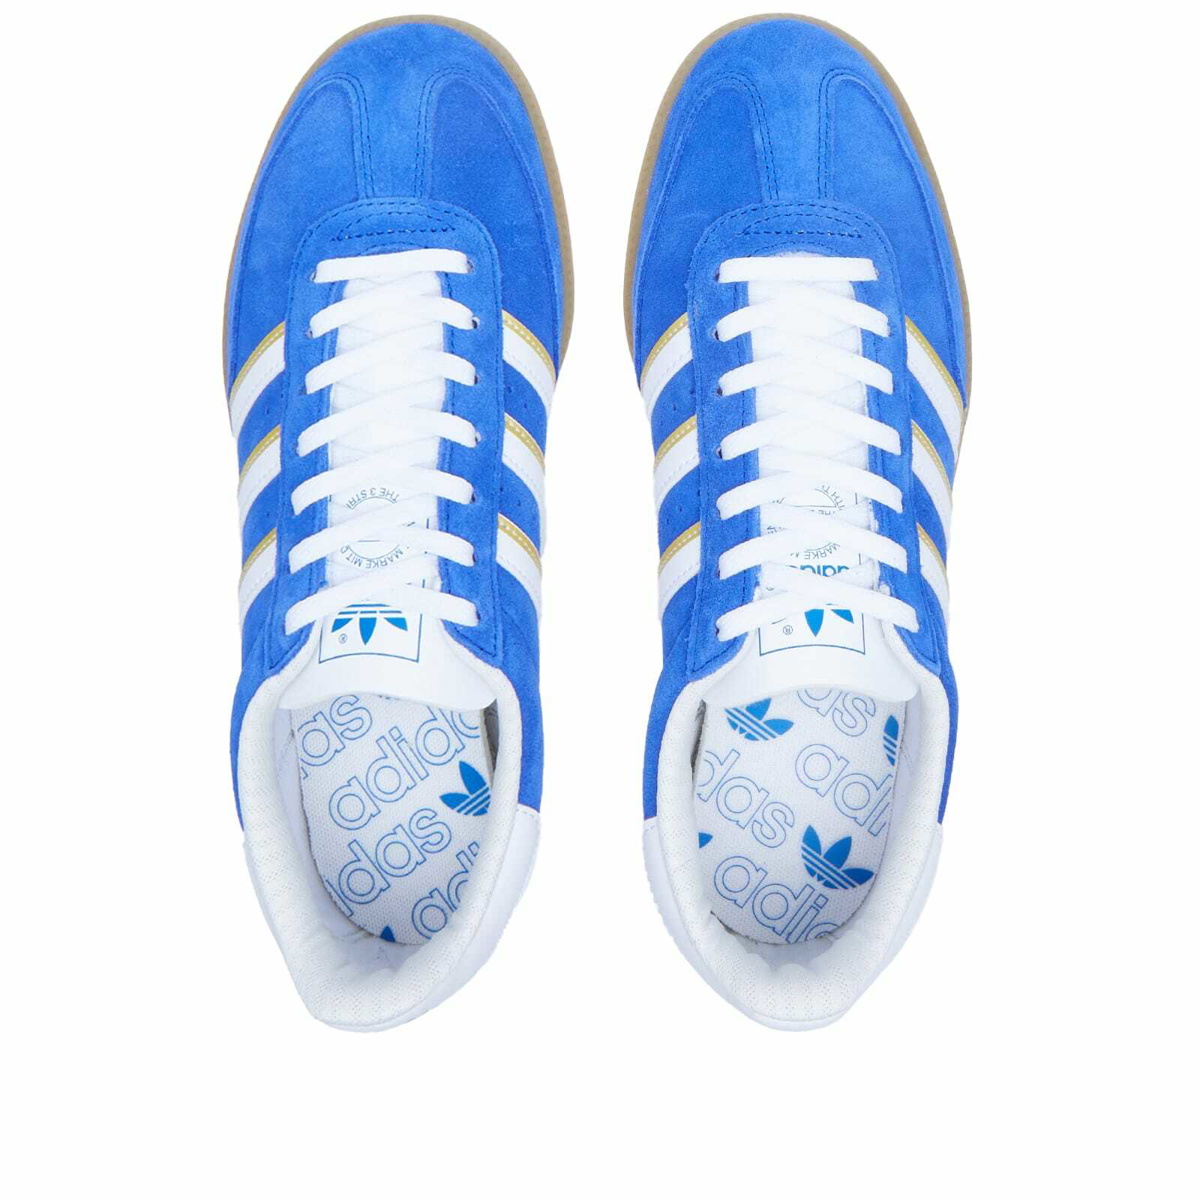 Sneakers Semi Hand adidas Adidas Blue/White in 2 Lucid